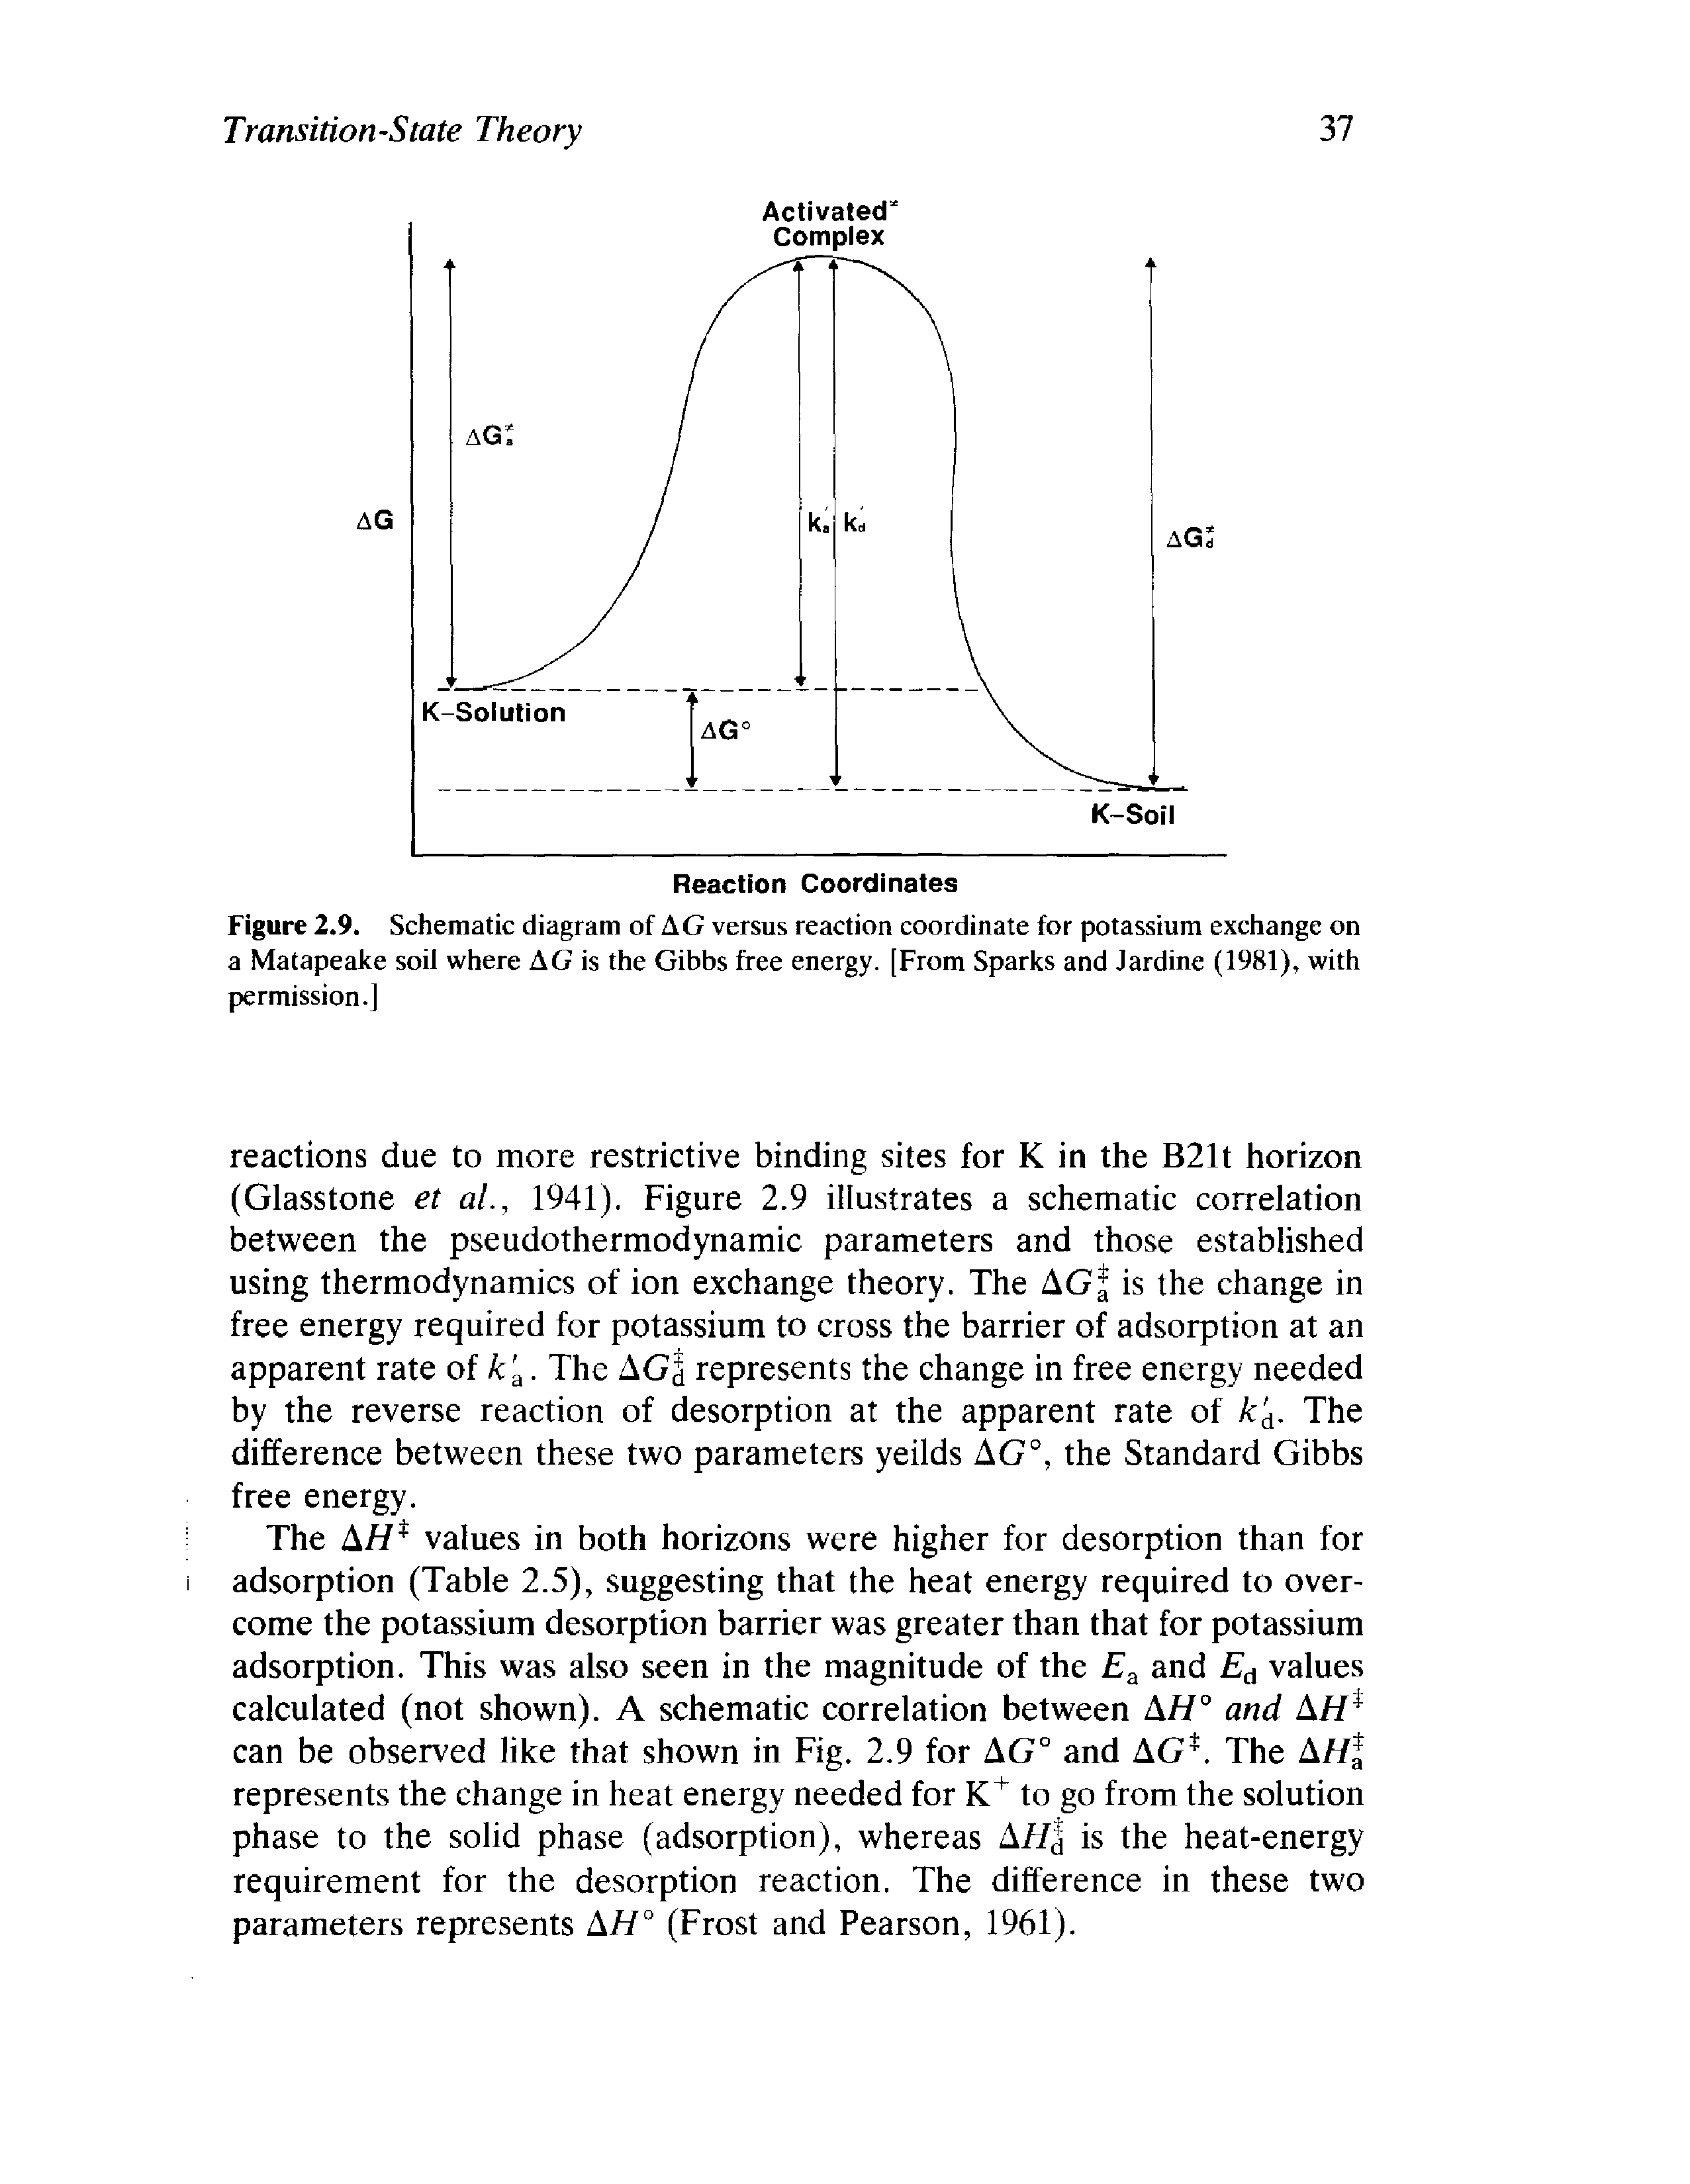 Figure 2.9. Schematic diagram of AG versus reaction coordinate for potassium exchange on a Matapeake soil where AG is the Gibbs free energy. [From Sparks and Jardine (1981), with permission.]...